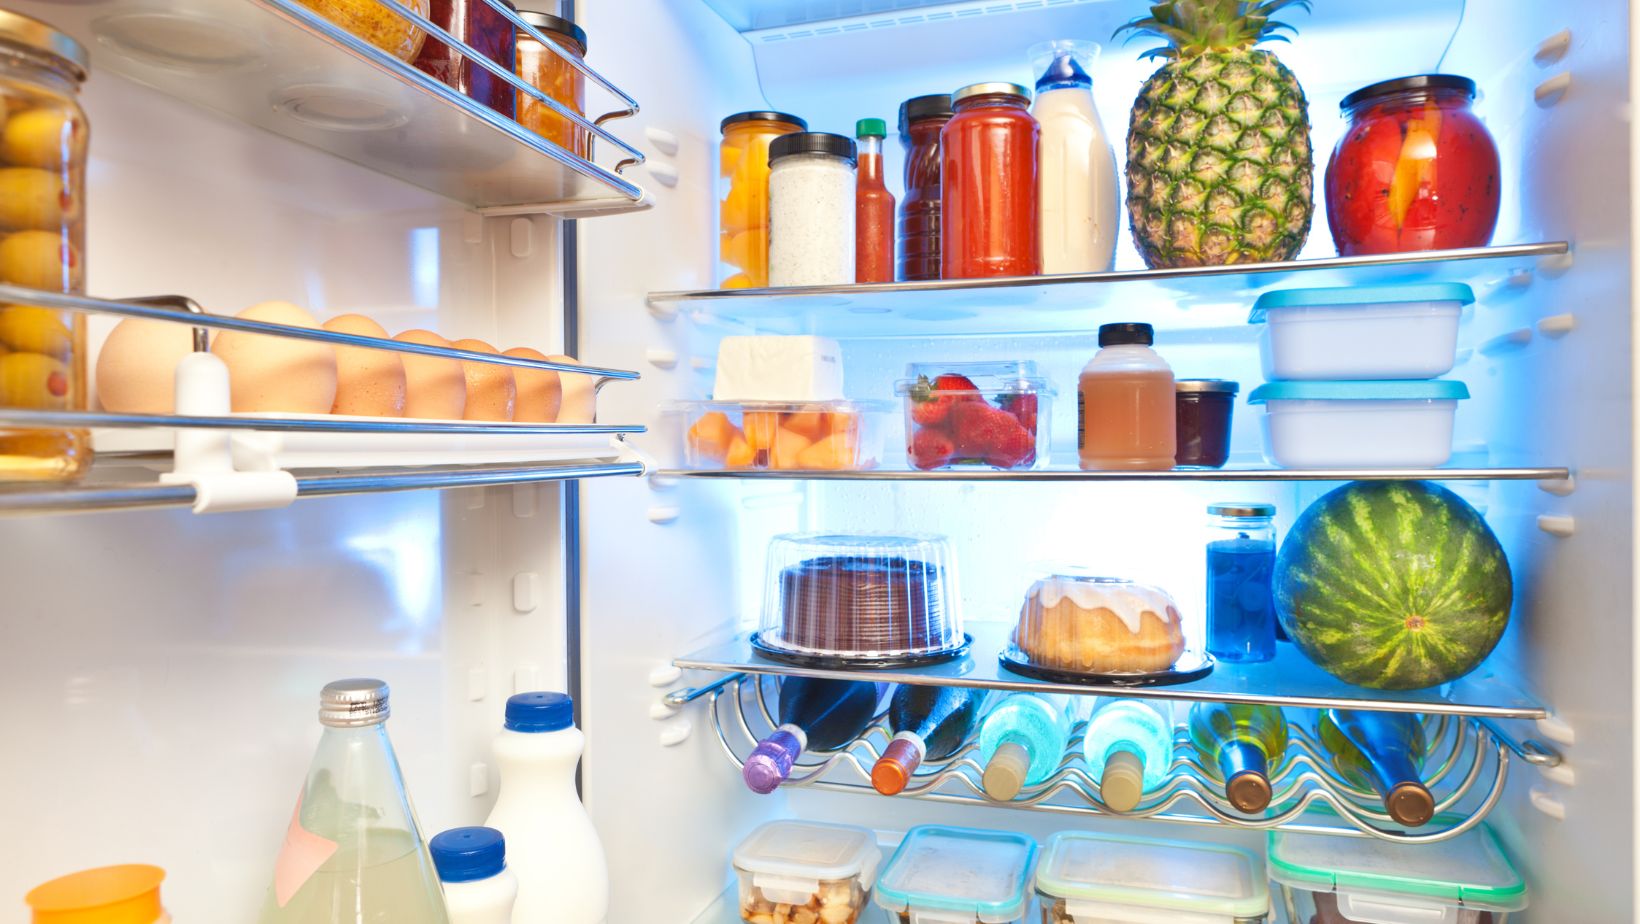 Interior of a refrigerator. In the top door bin are several jars. The bin below has eggs and a jar of green olives. The bottom door bin has a glass bottle and plastic bottles of milk. The body of the fridge has four shelves containing condiments, produce, two cakes and several bottles of wine.